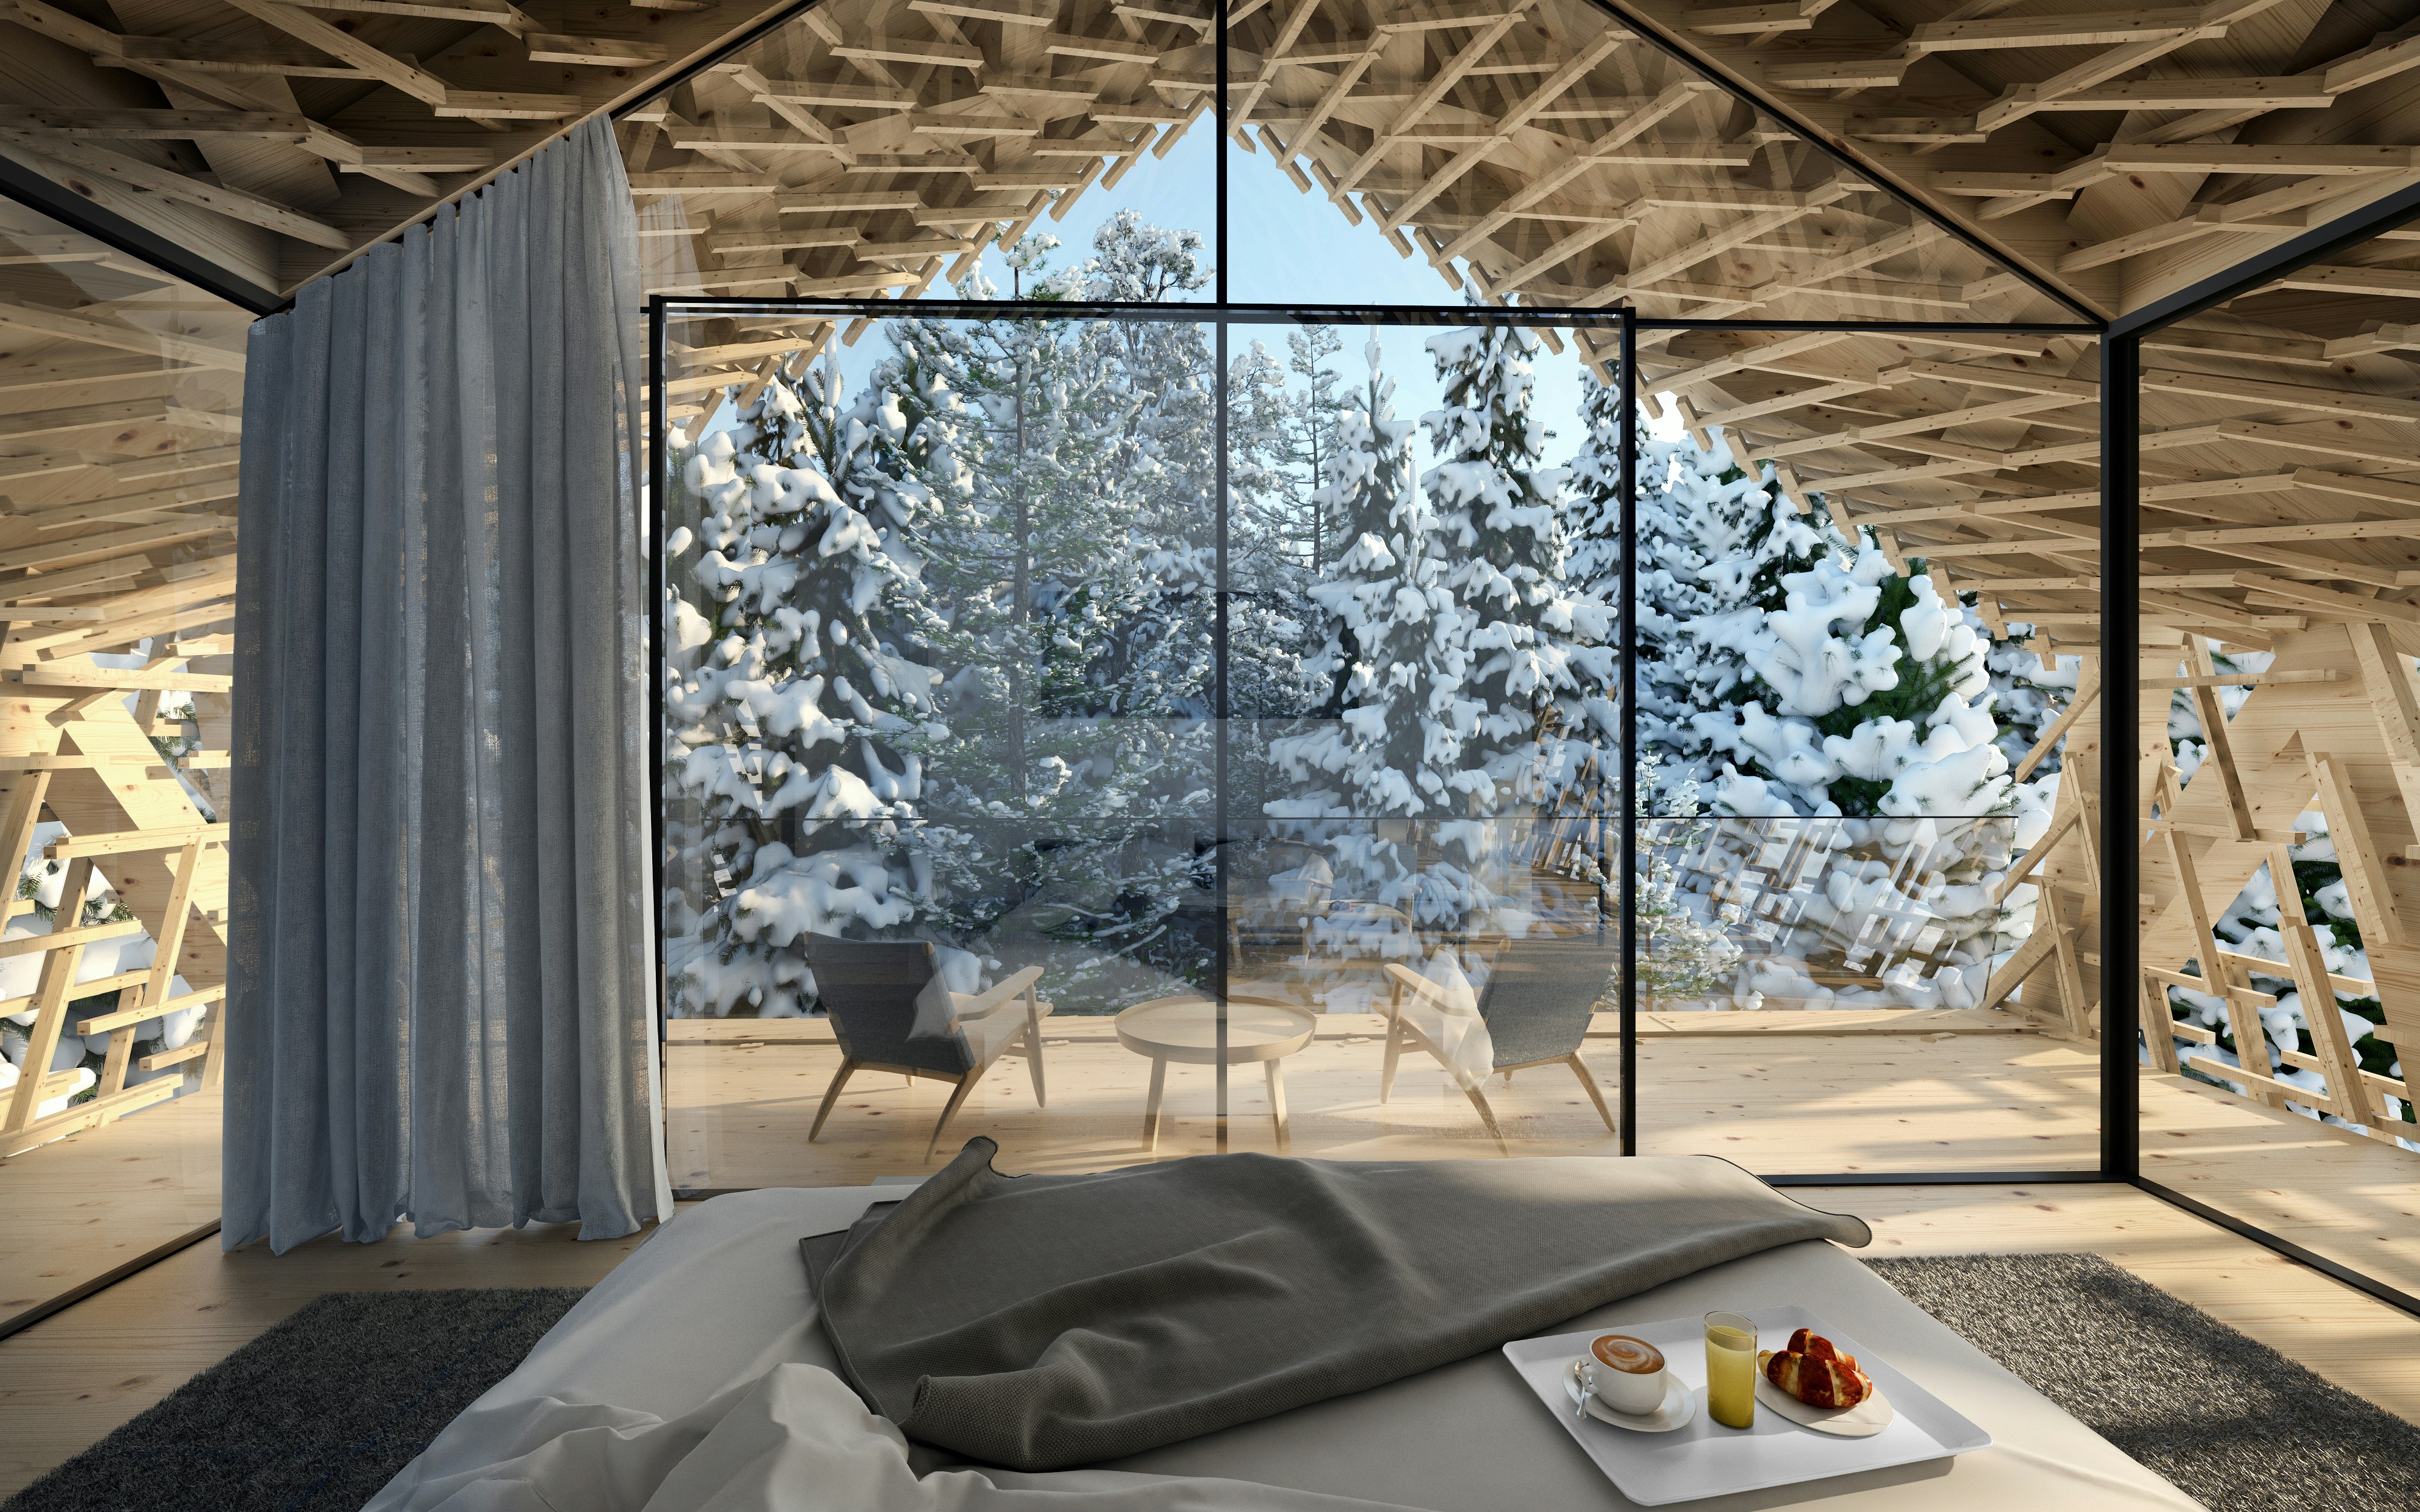 A rendering of the bedroom within the treehouse with the huge window wall